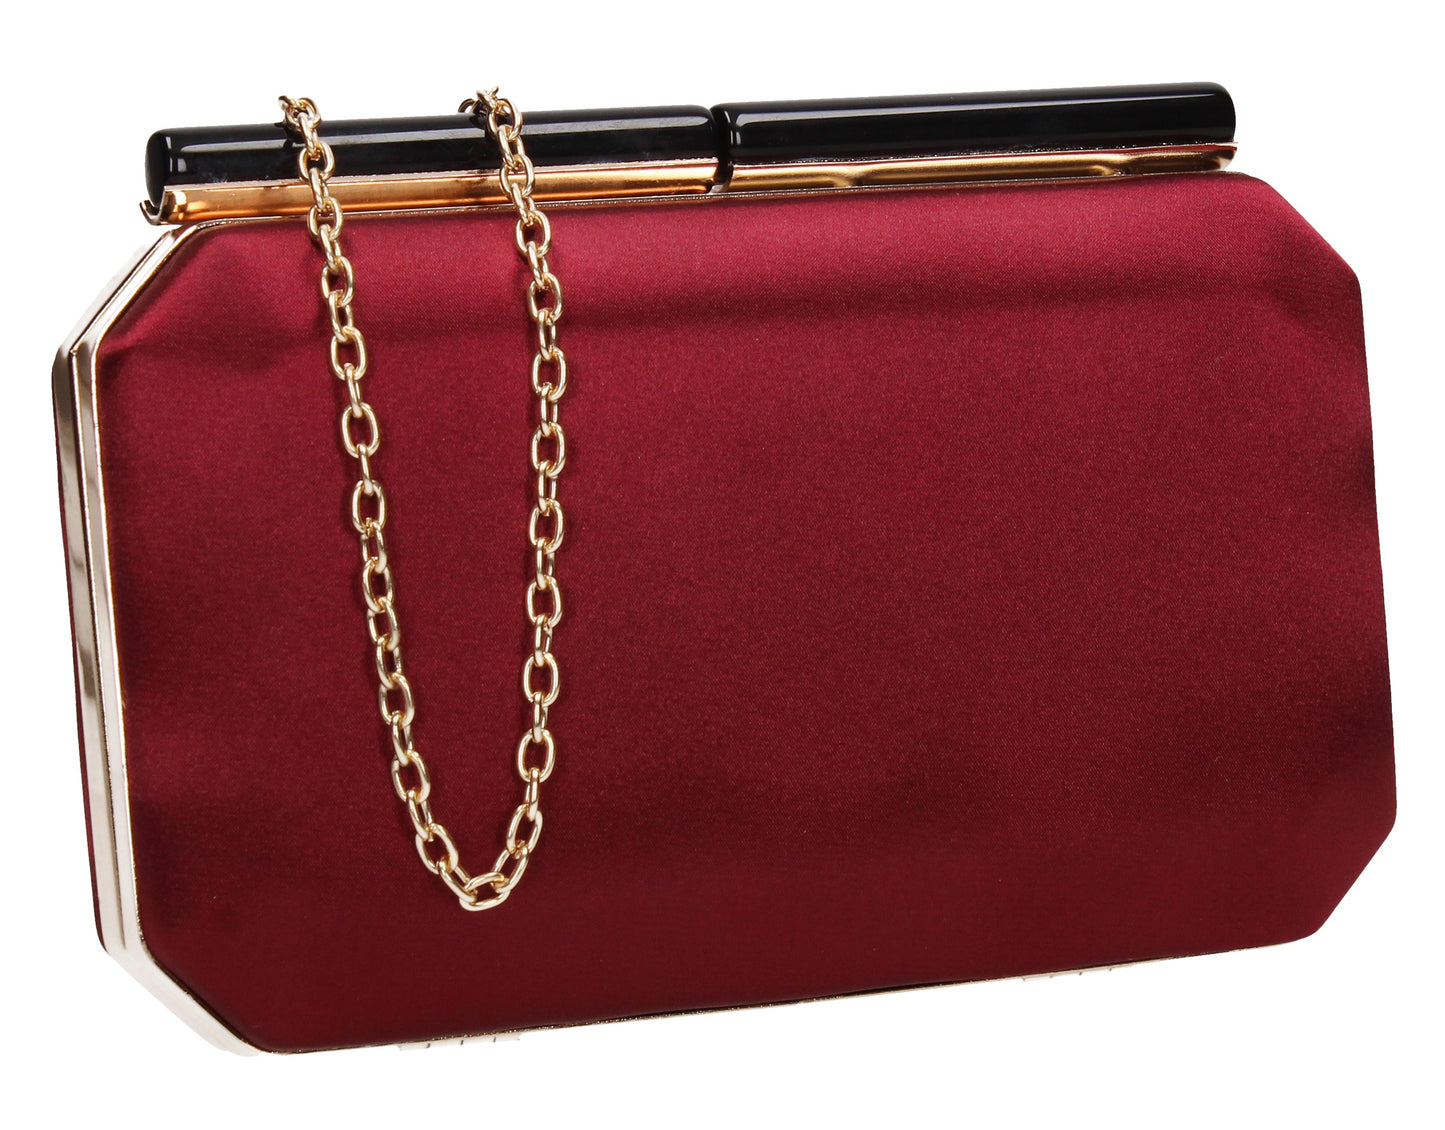 SWANKYSWANS Millie Clutch Bag Red Cute Cheap Clutch Bag For Weddings School and Work